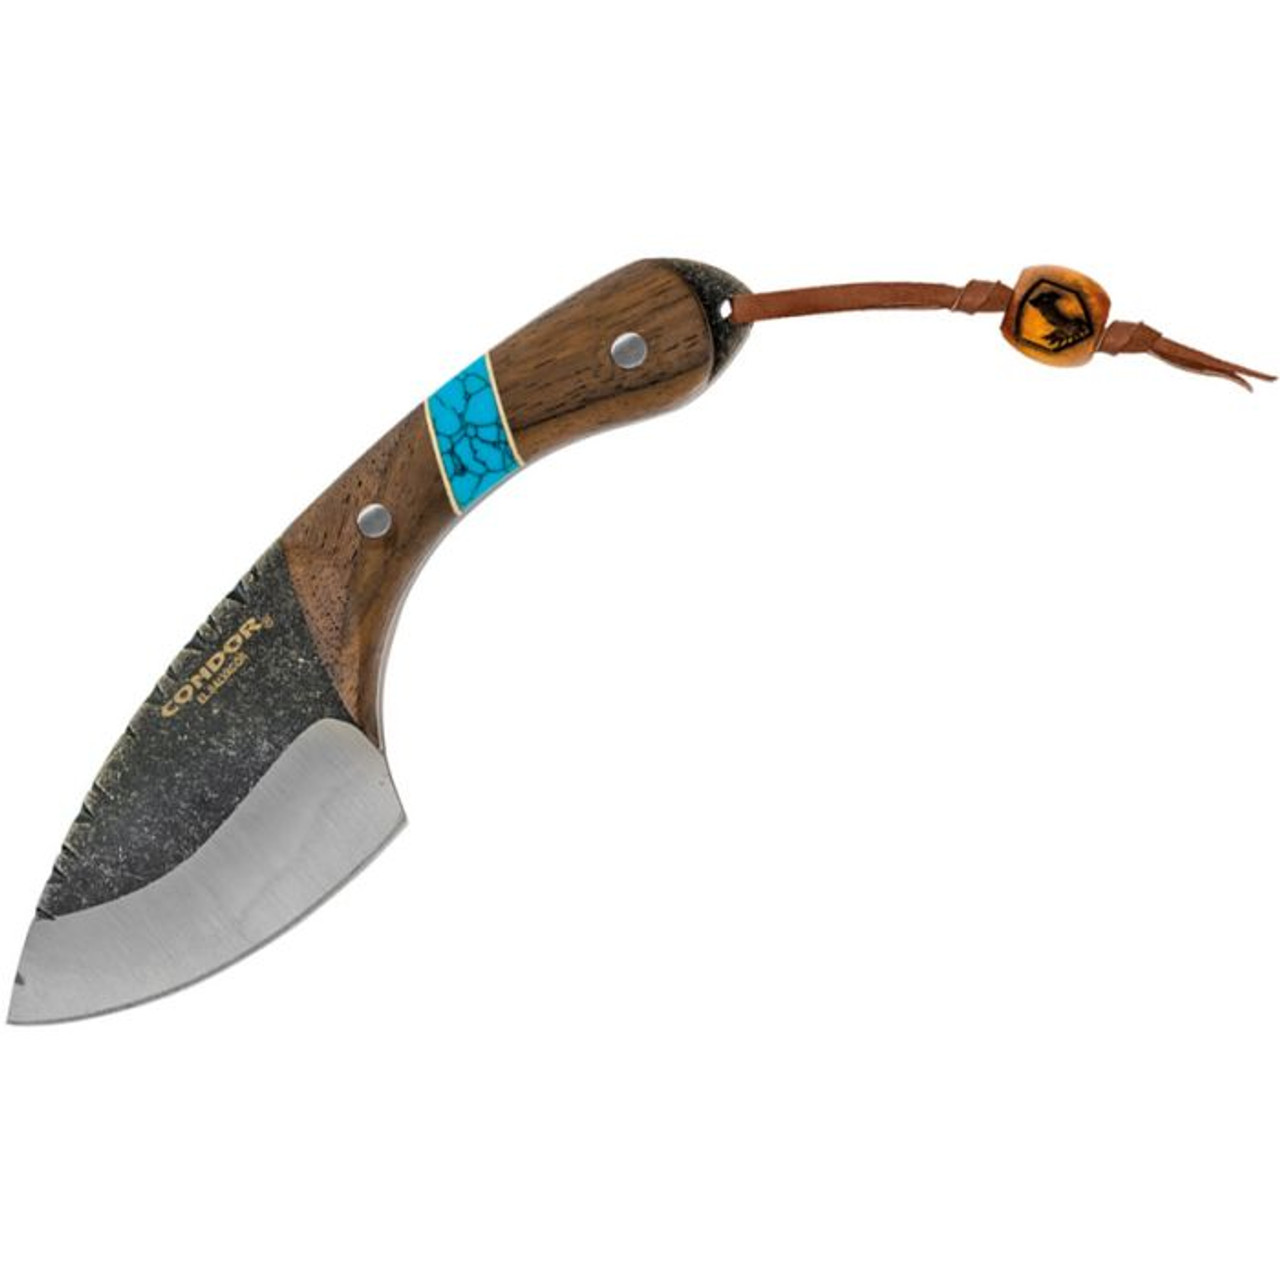 Condor Blue River Skinner (CTK112354C) 3.4" 440C Natural Drop Point Plain Blade, Walnut Wood and Turquoise Handle, Brown Leather Sheath